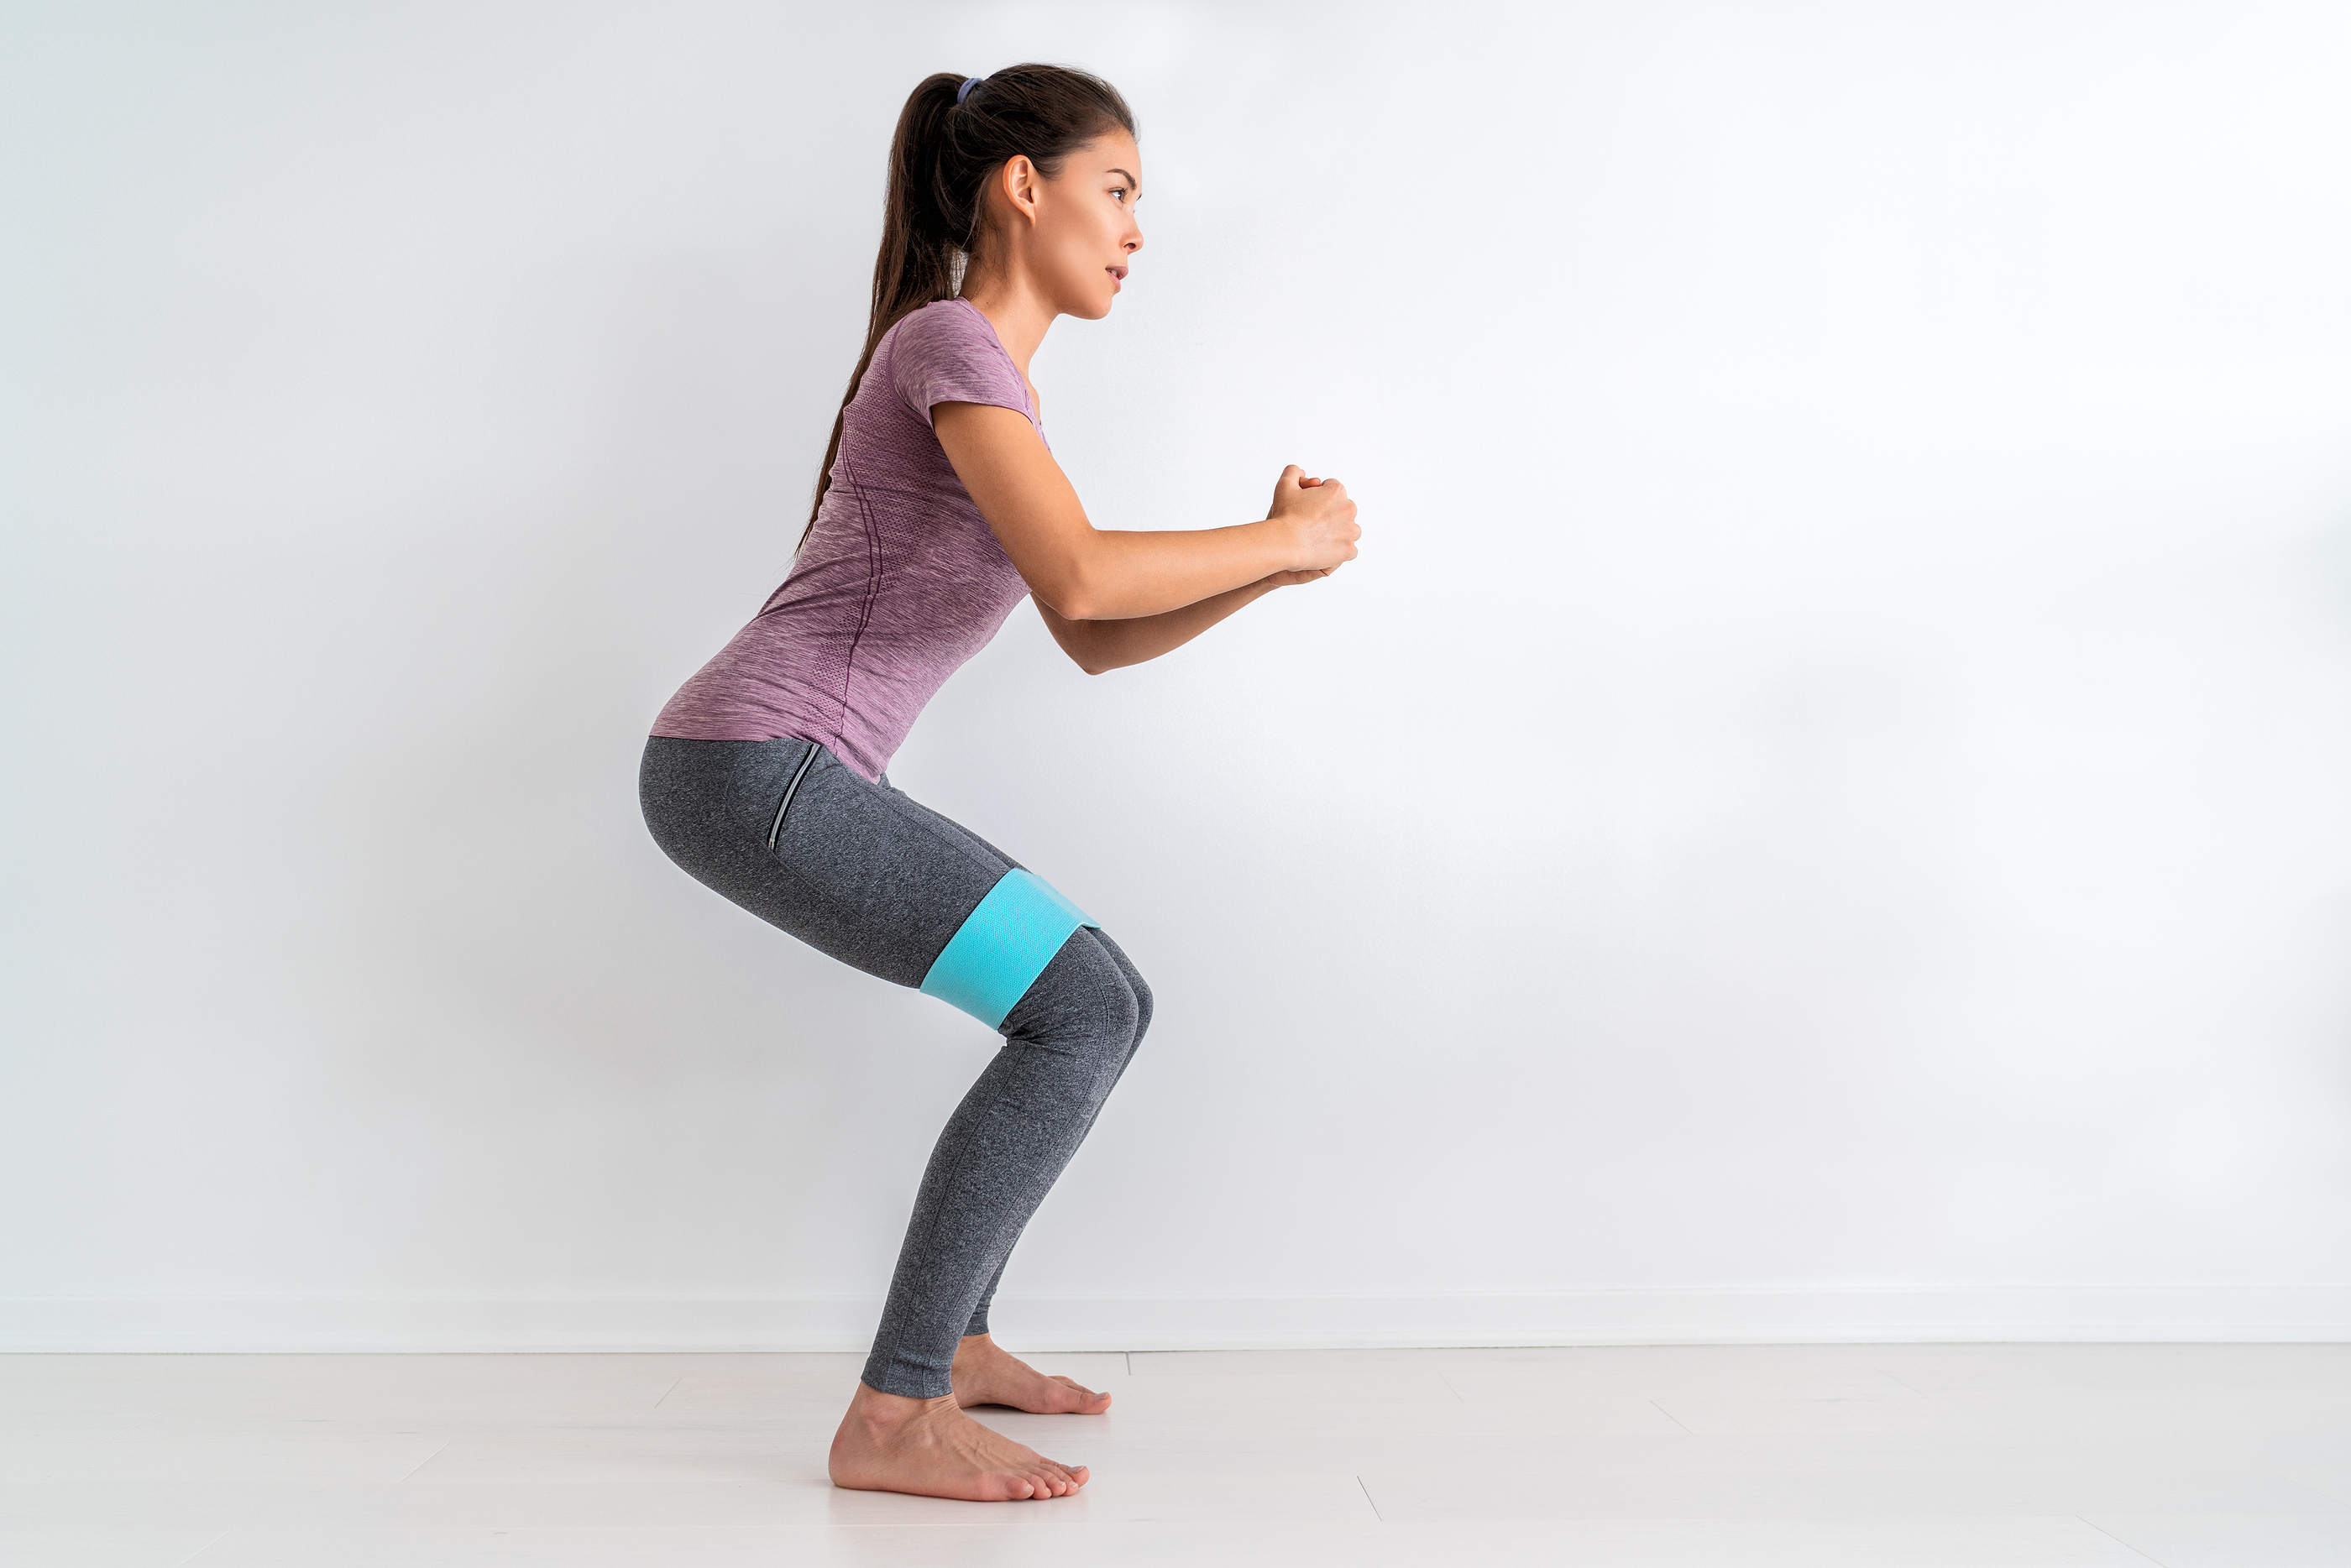 Resistance Band Exercises For Glutes